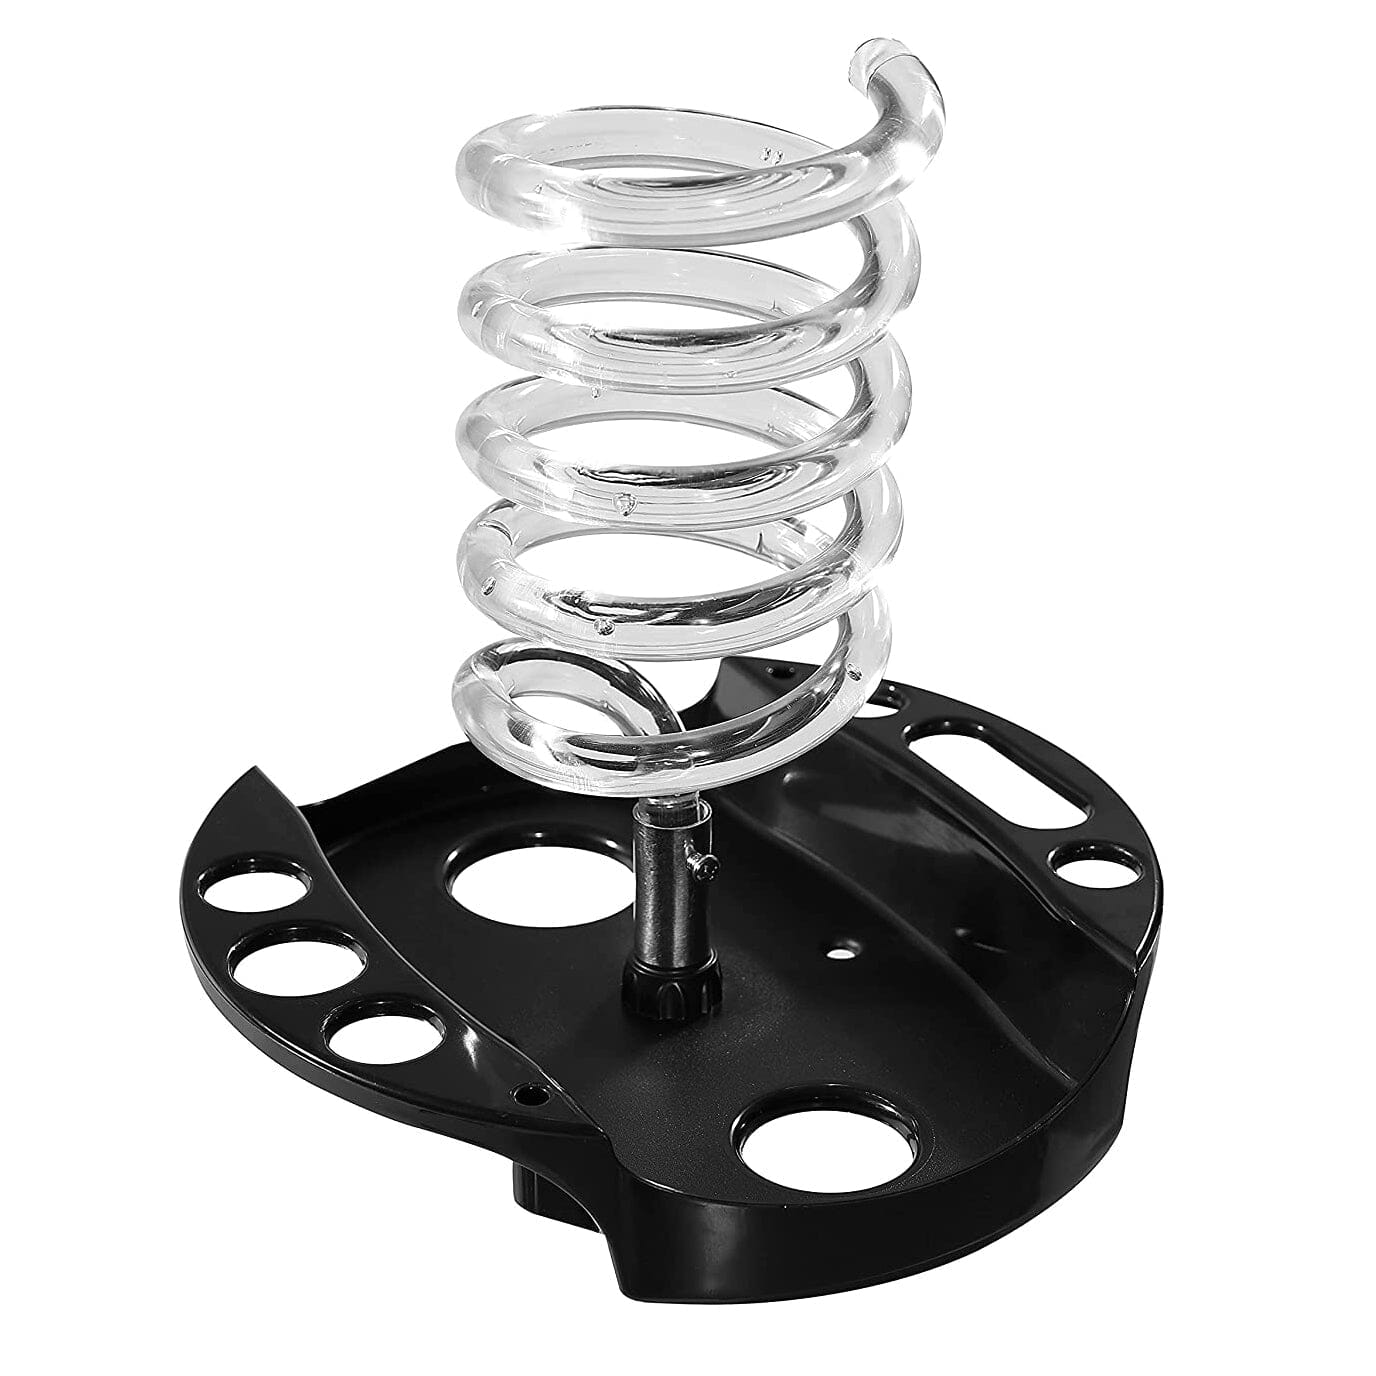 Hair Dryer Stand with Tray Acrylic and Two Spiral Holders | D0095-1S | Barber and Stylist Hair Salon Accessories HOTLINE BEAUTY 